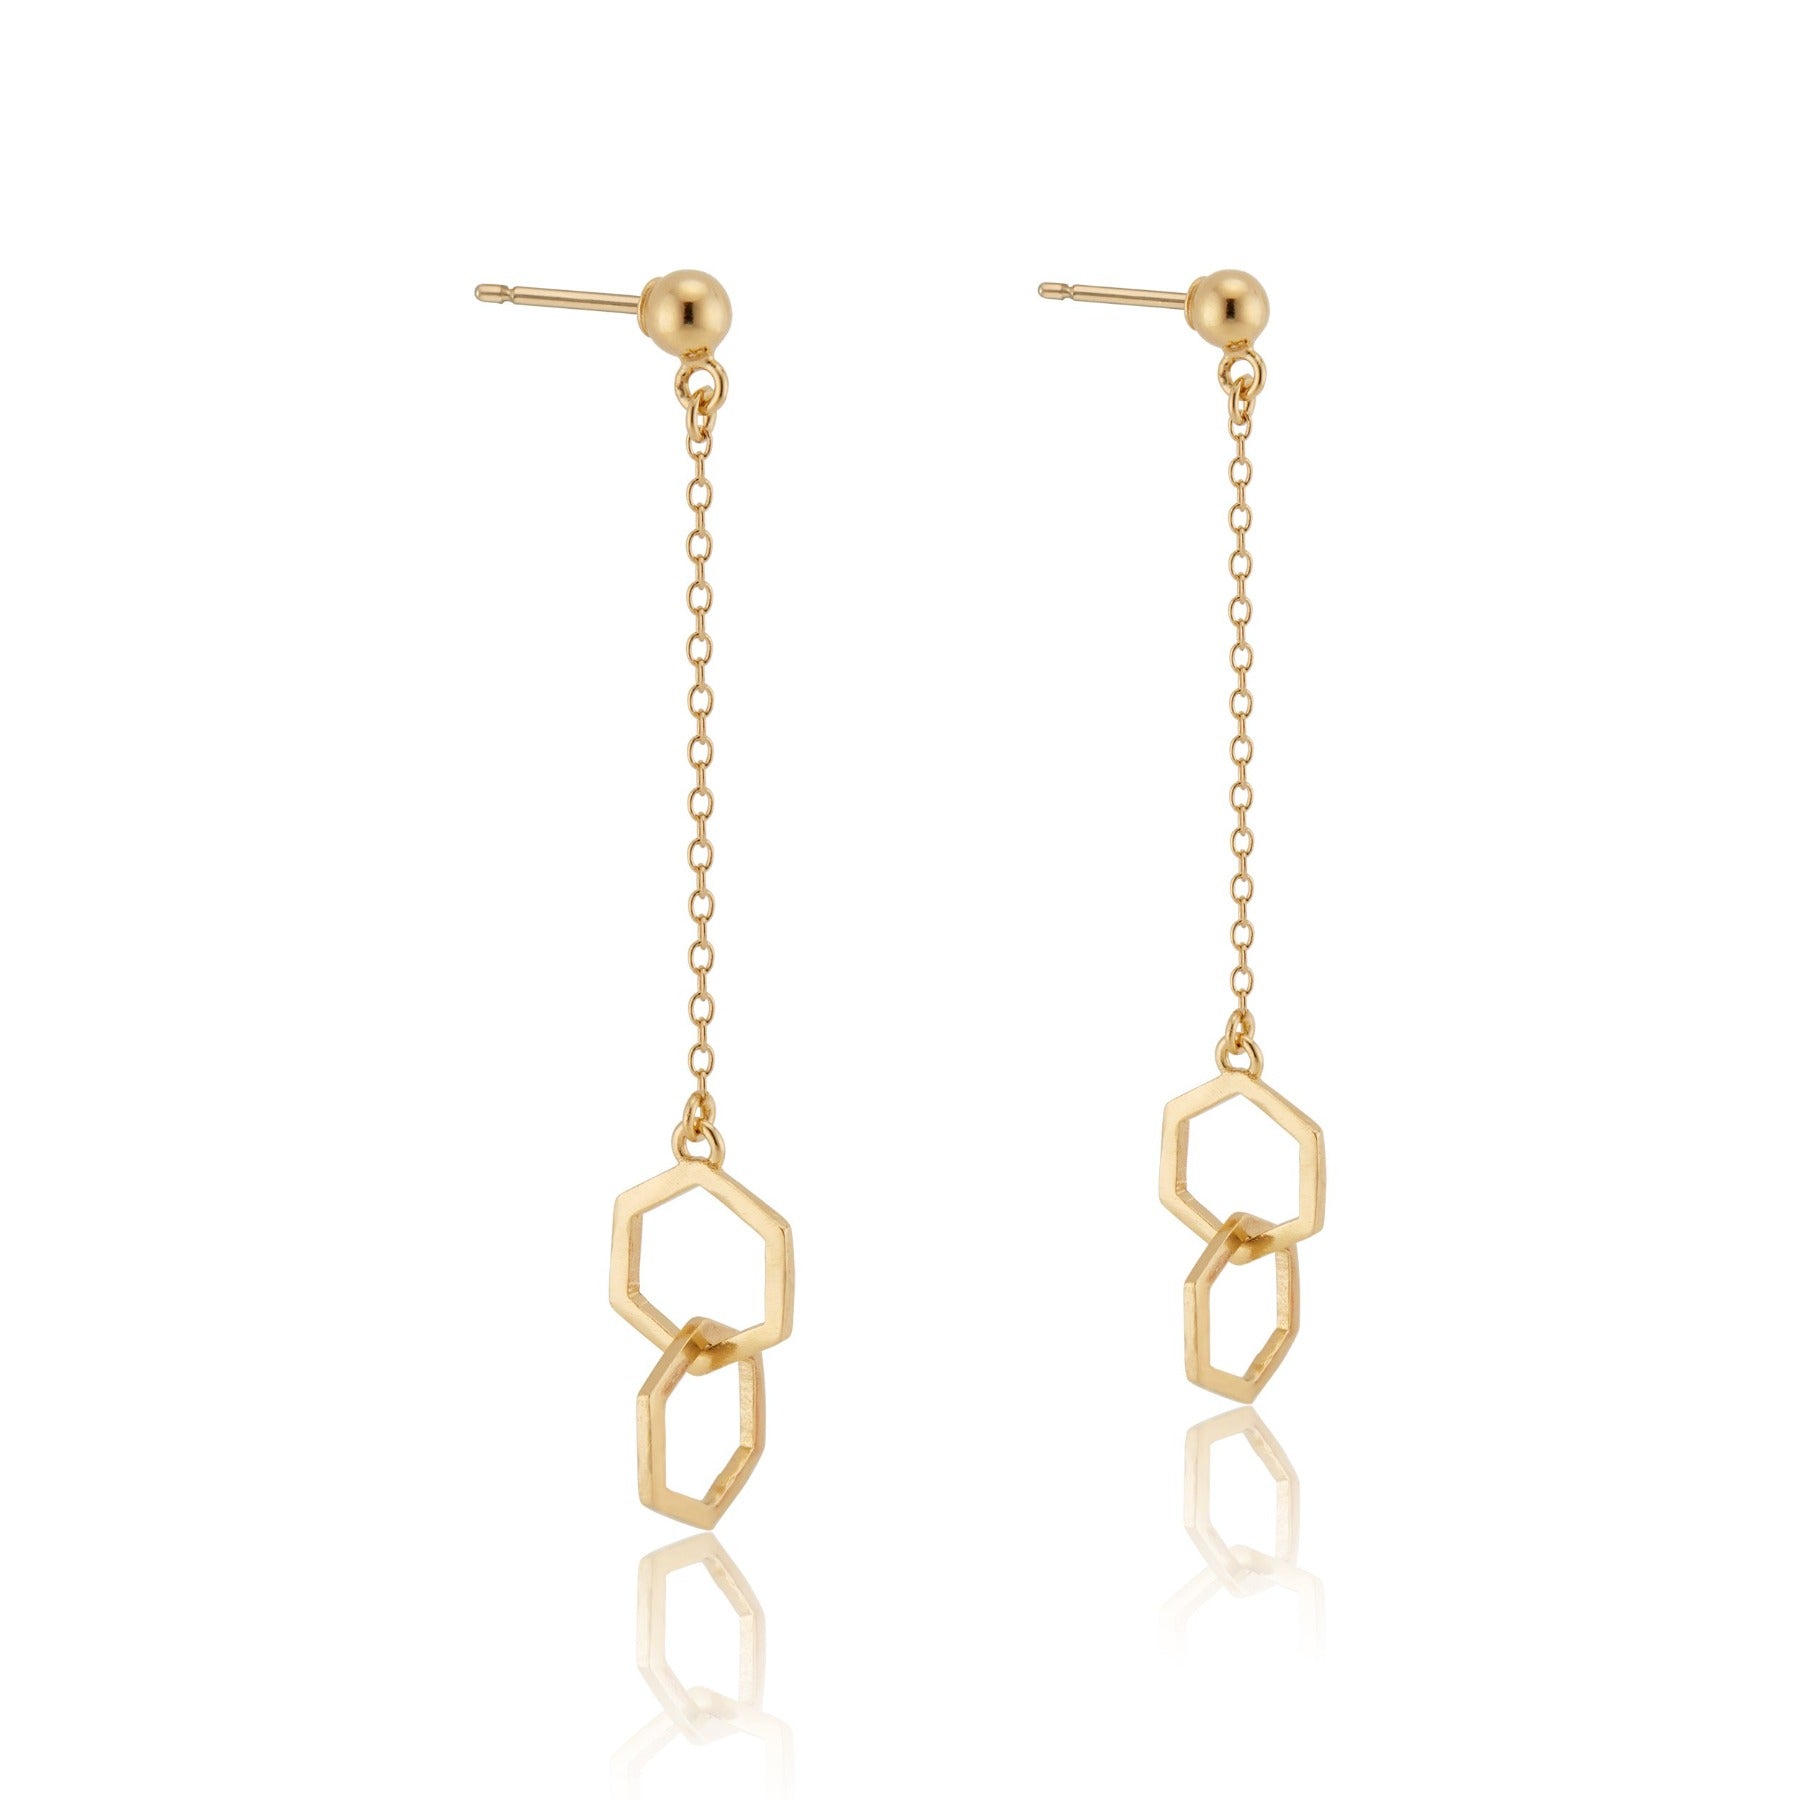 Dangling earrings with delicate chain and interlocking geometric hexagons in 18k gold vermeil.